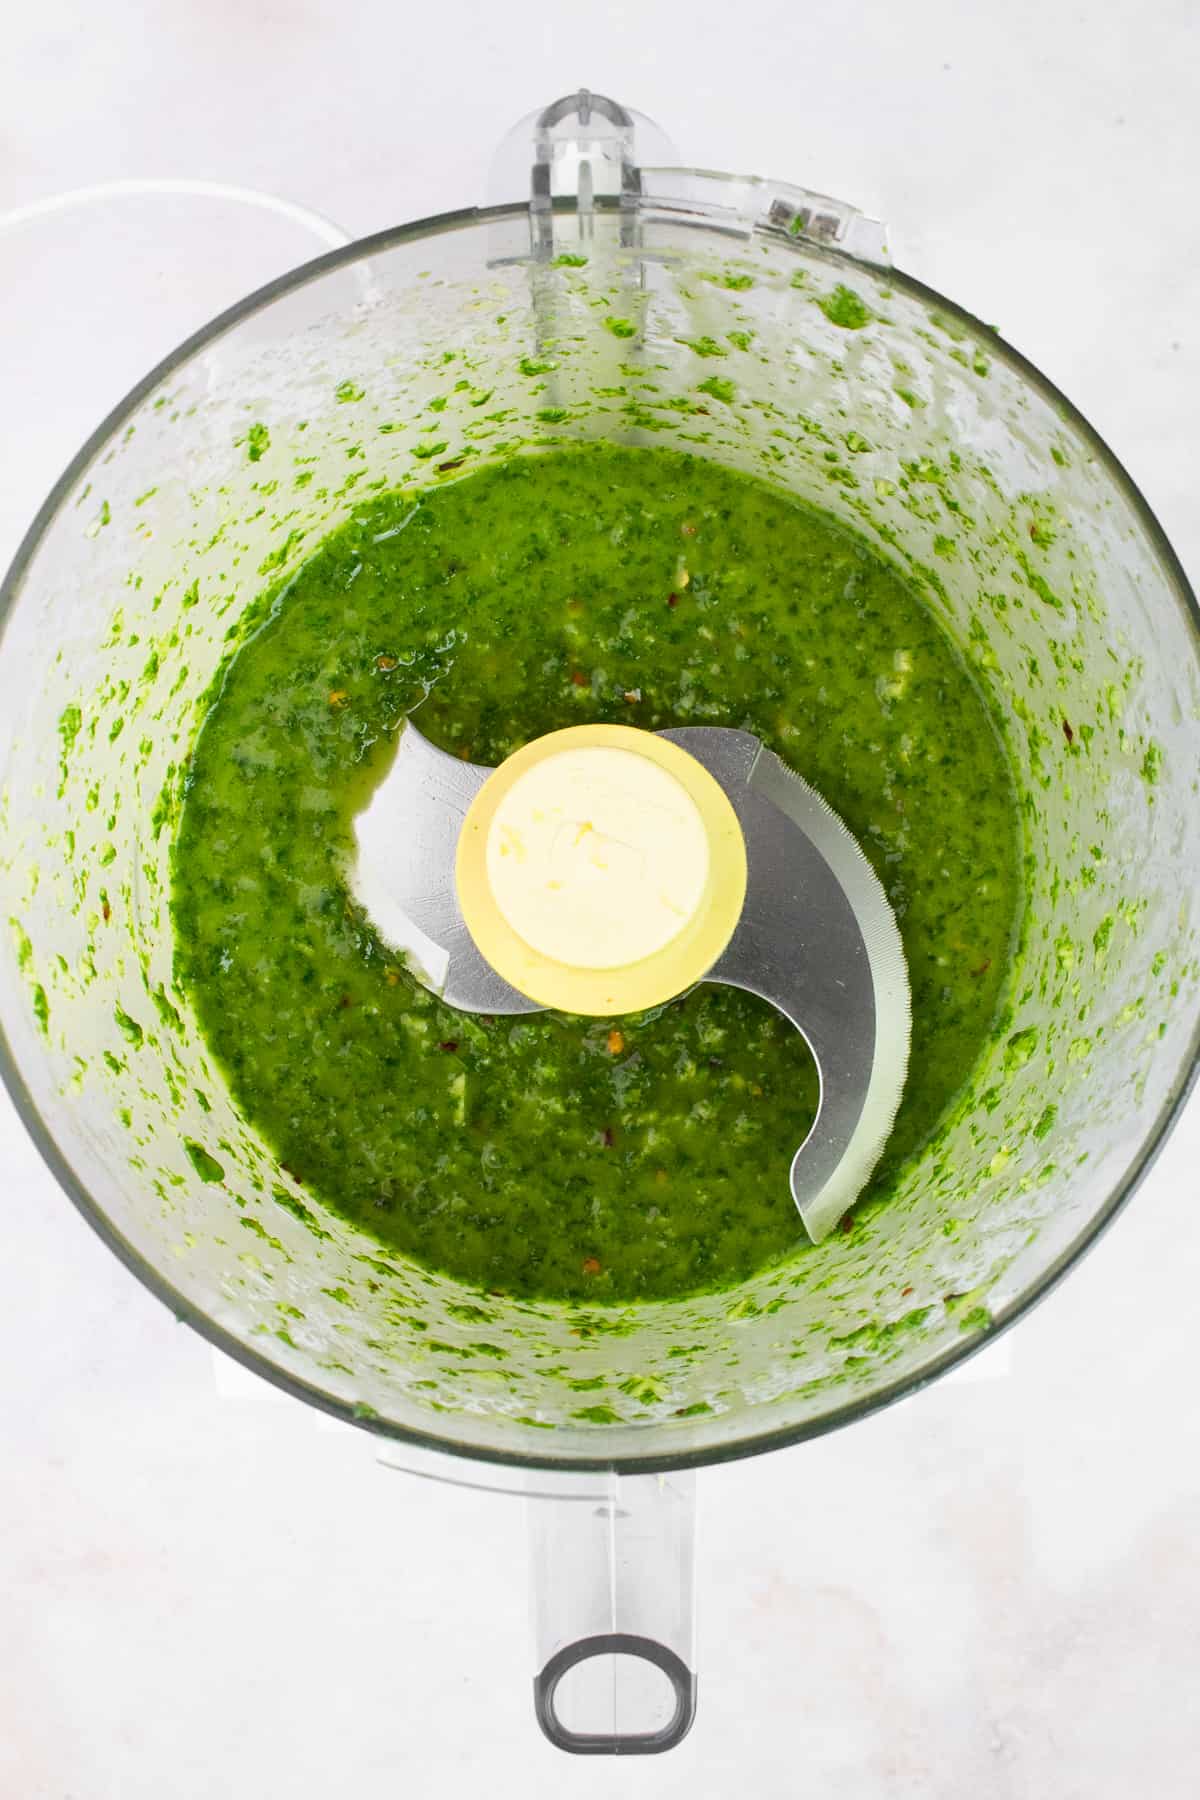 Basil olive oil sauce in the bowl of a food processor